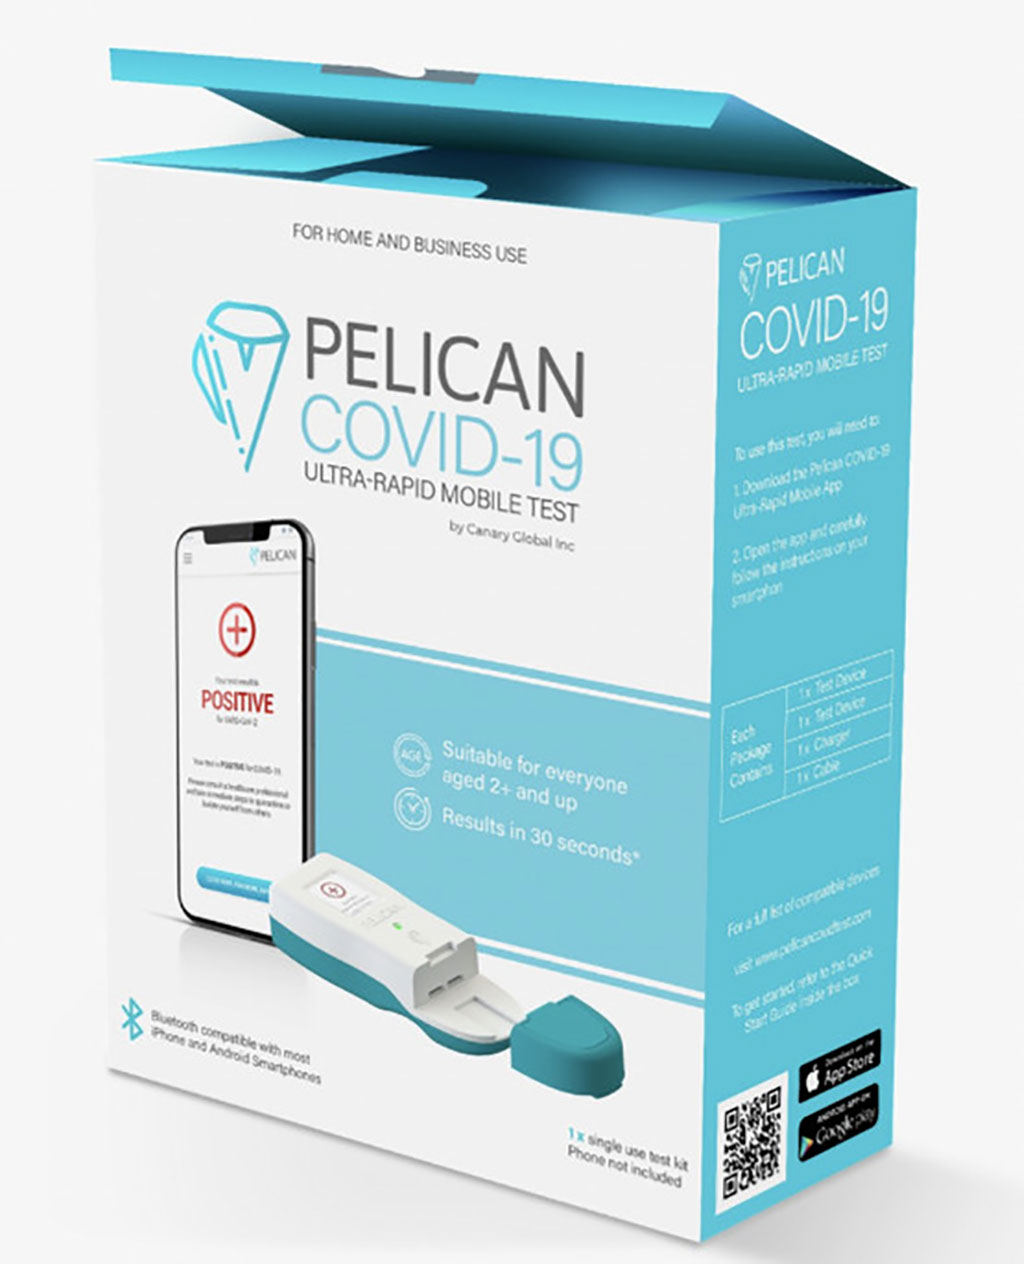 Image: Pelican COVID-19 Ultra-Rapid Mobile Test (Photo courtesy of Canary Global Inc.)